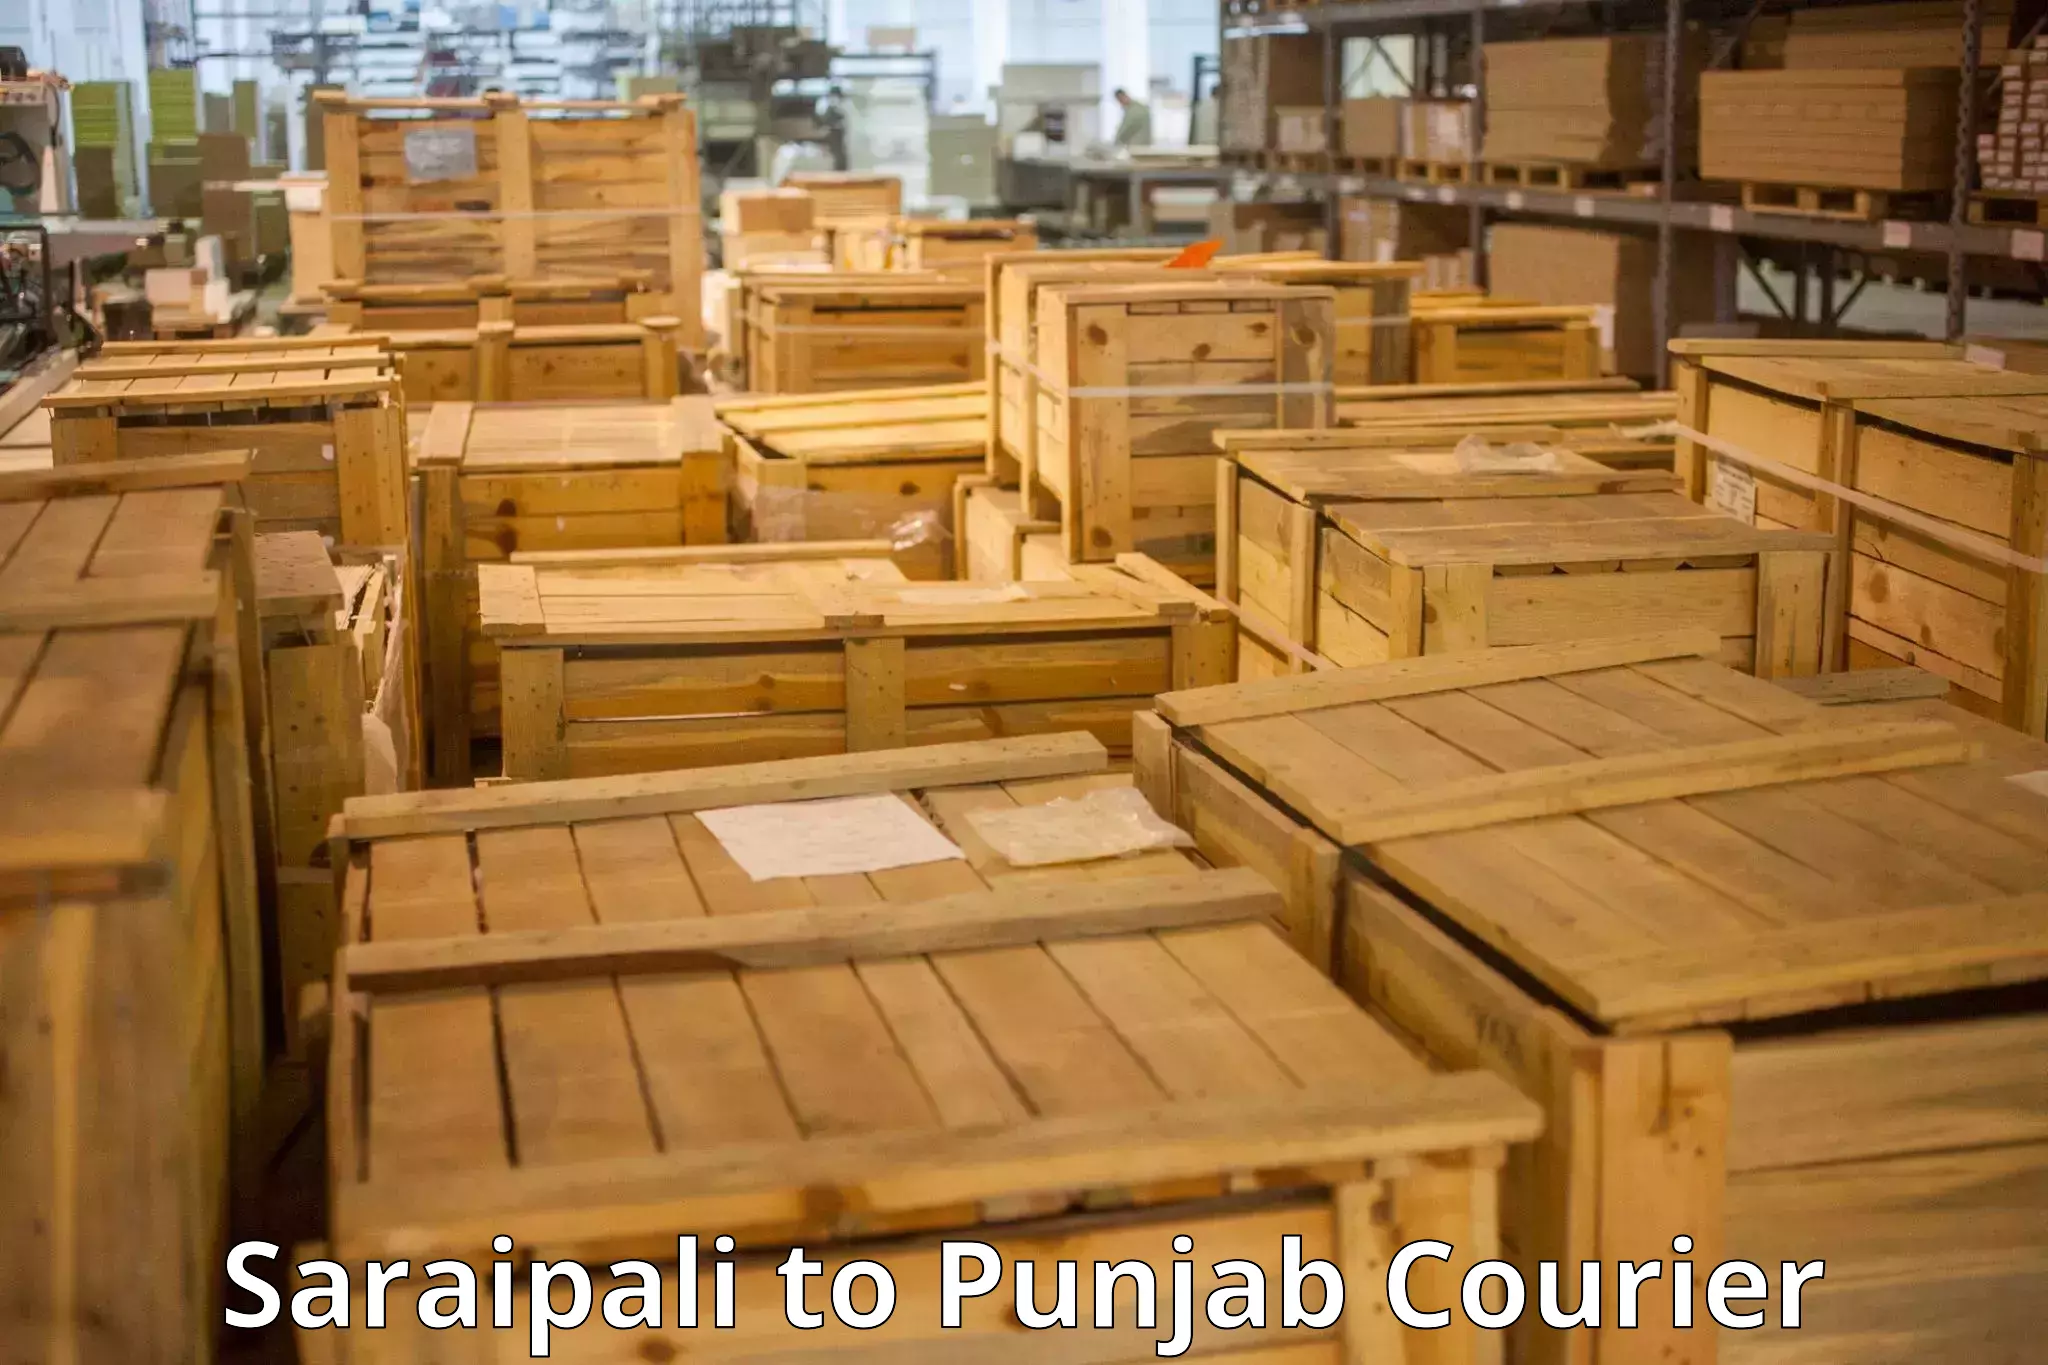 Luggage delivery solutions Saraipali to Punjab